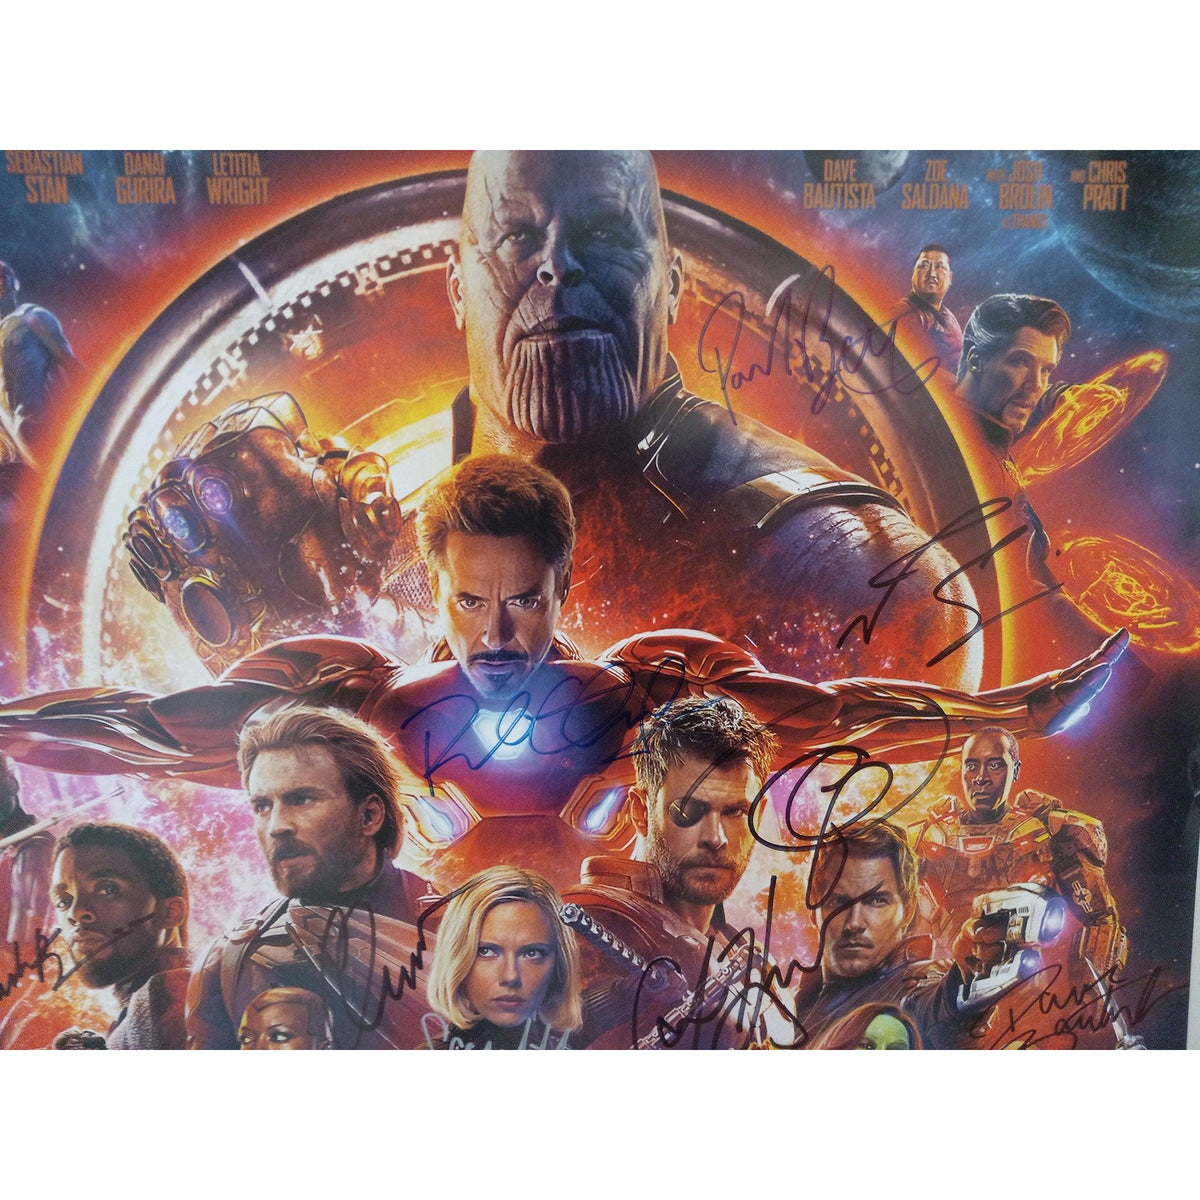  HWC Trading A3 FR Avengers Infinity War Endgame Movie Poster  Robert Downey Jr Chris Evans Chris Hemsworth Signed Gift FRAMED A3 Printed  Autograph Film Gifts Print Photo Picture Display: Posters 